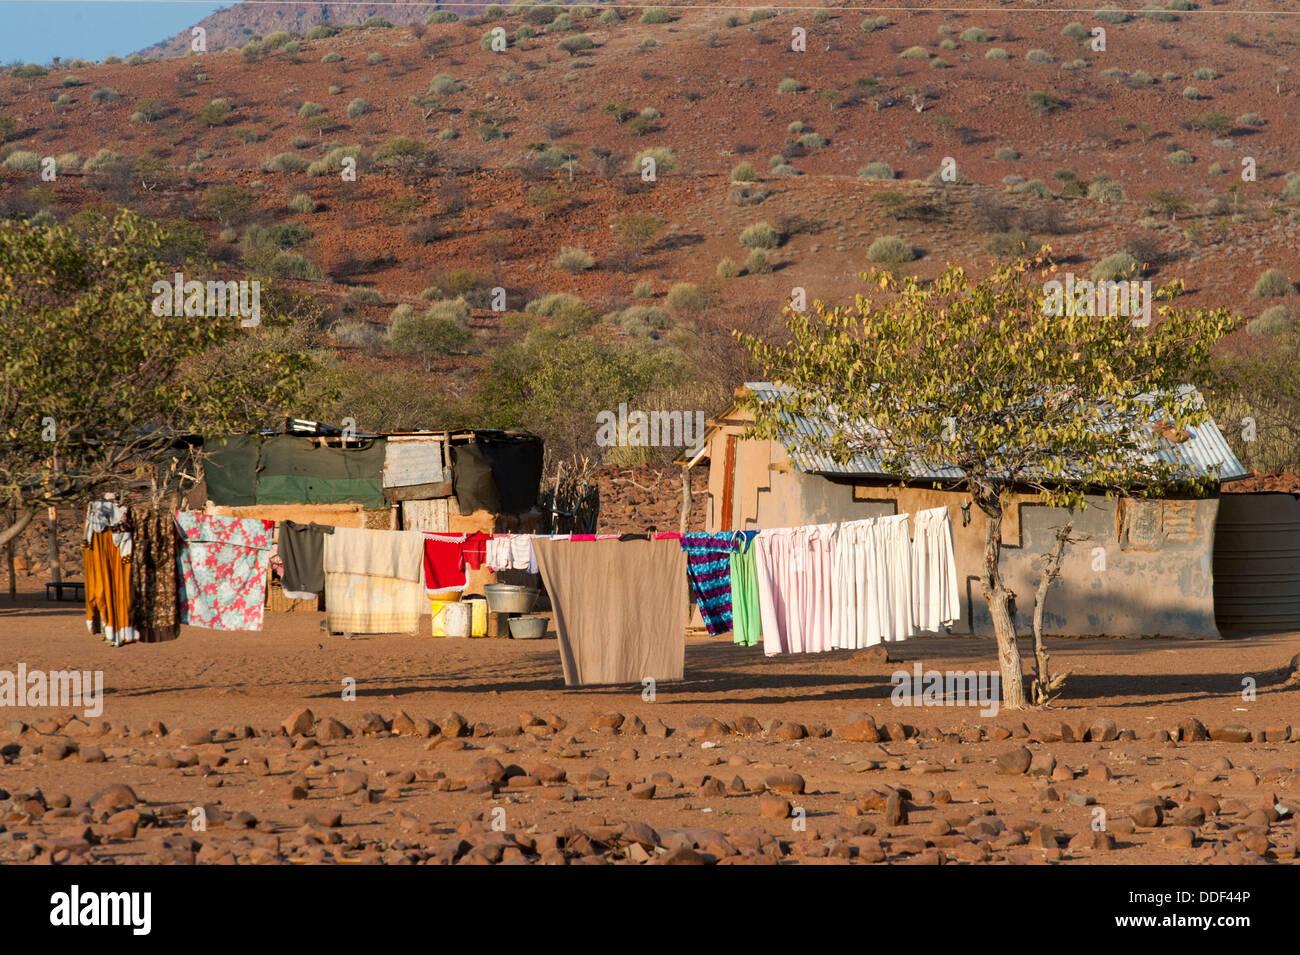 Farmstead with laundry hanging to dry set in a dry landscape, Kunene Region, Namibia Stock Photo